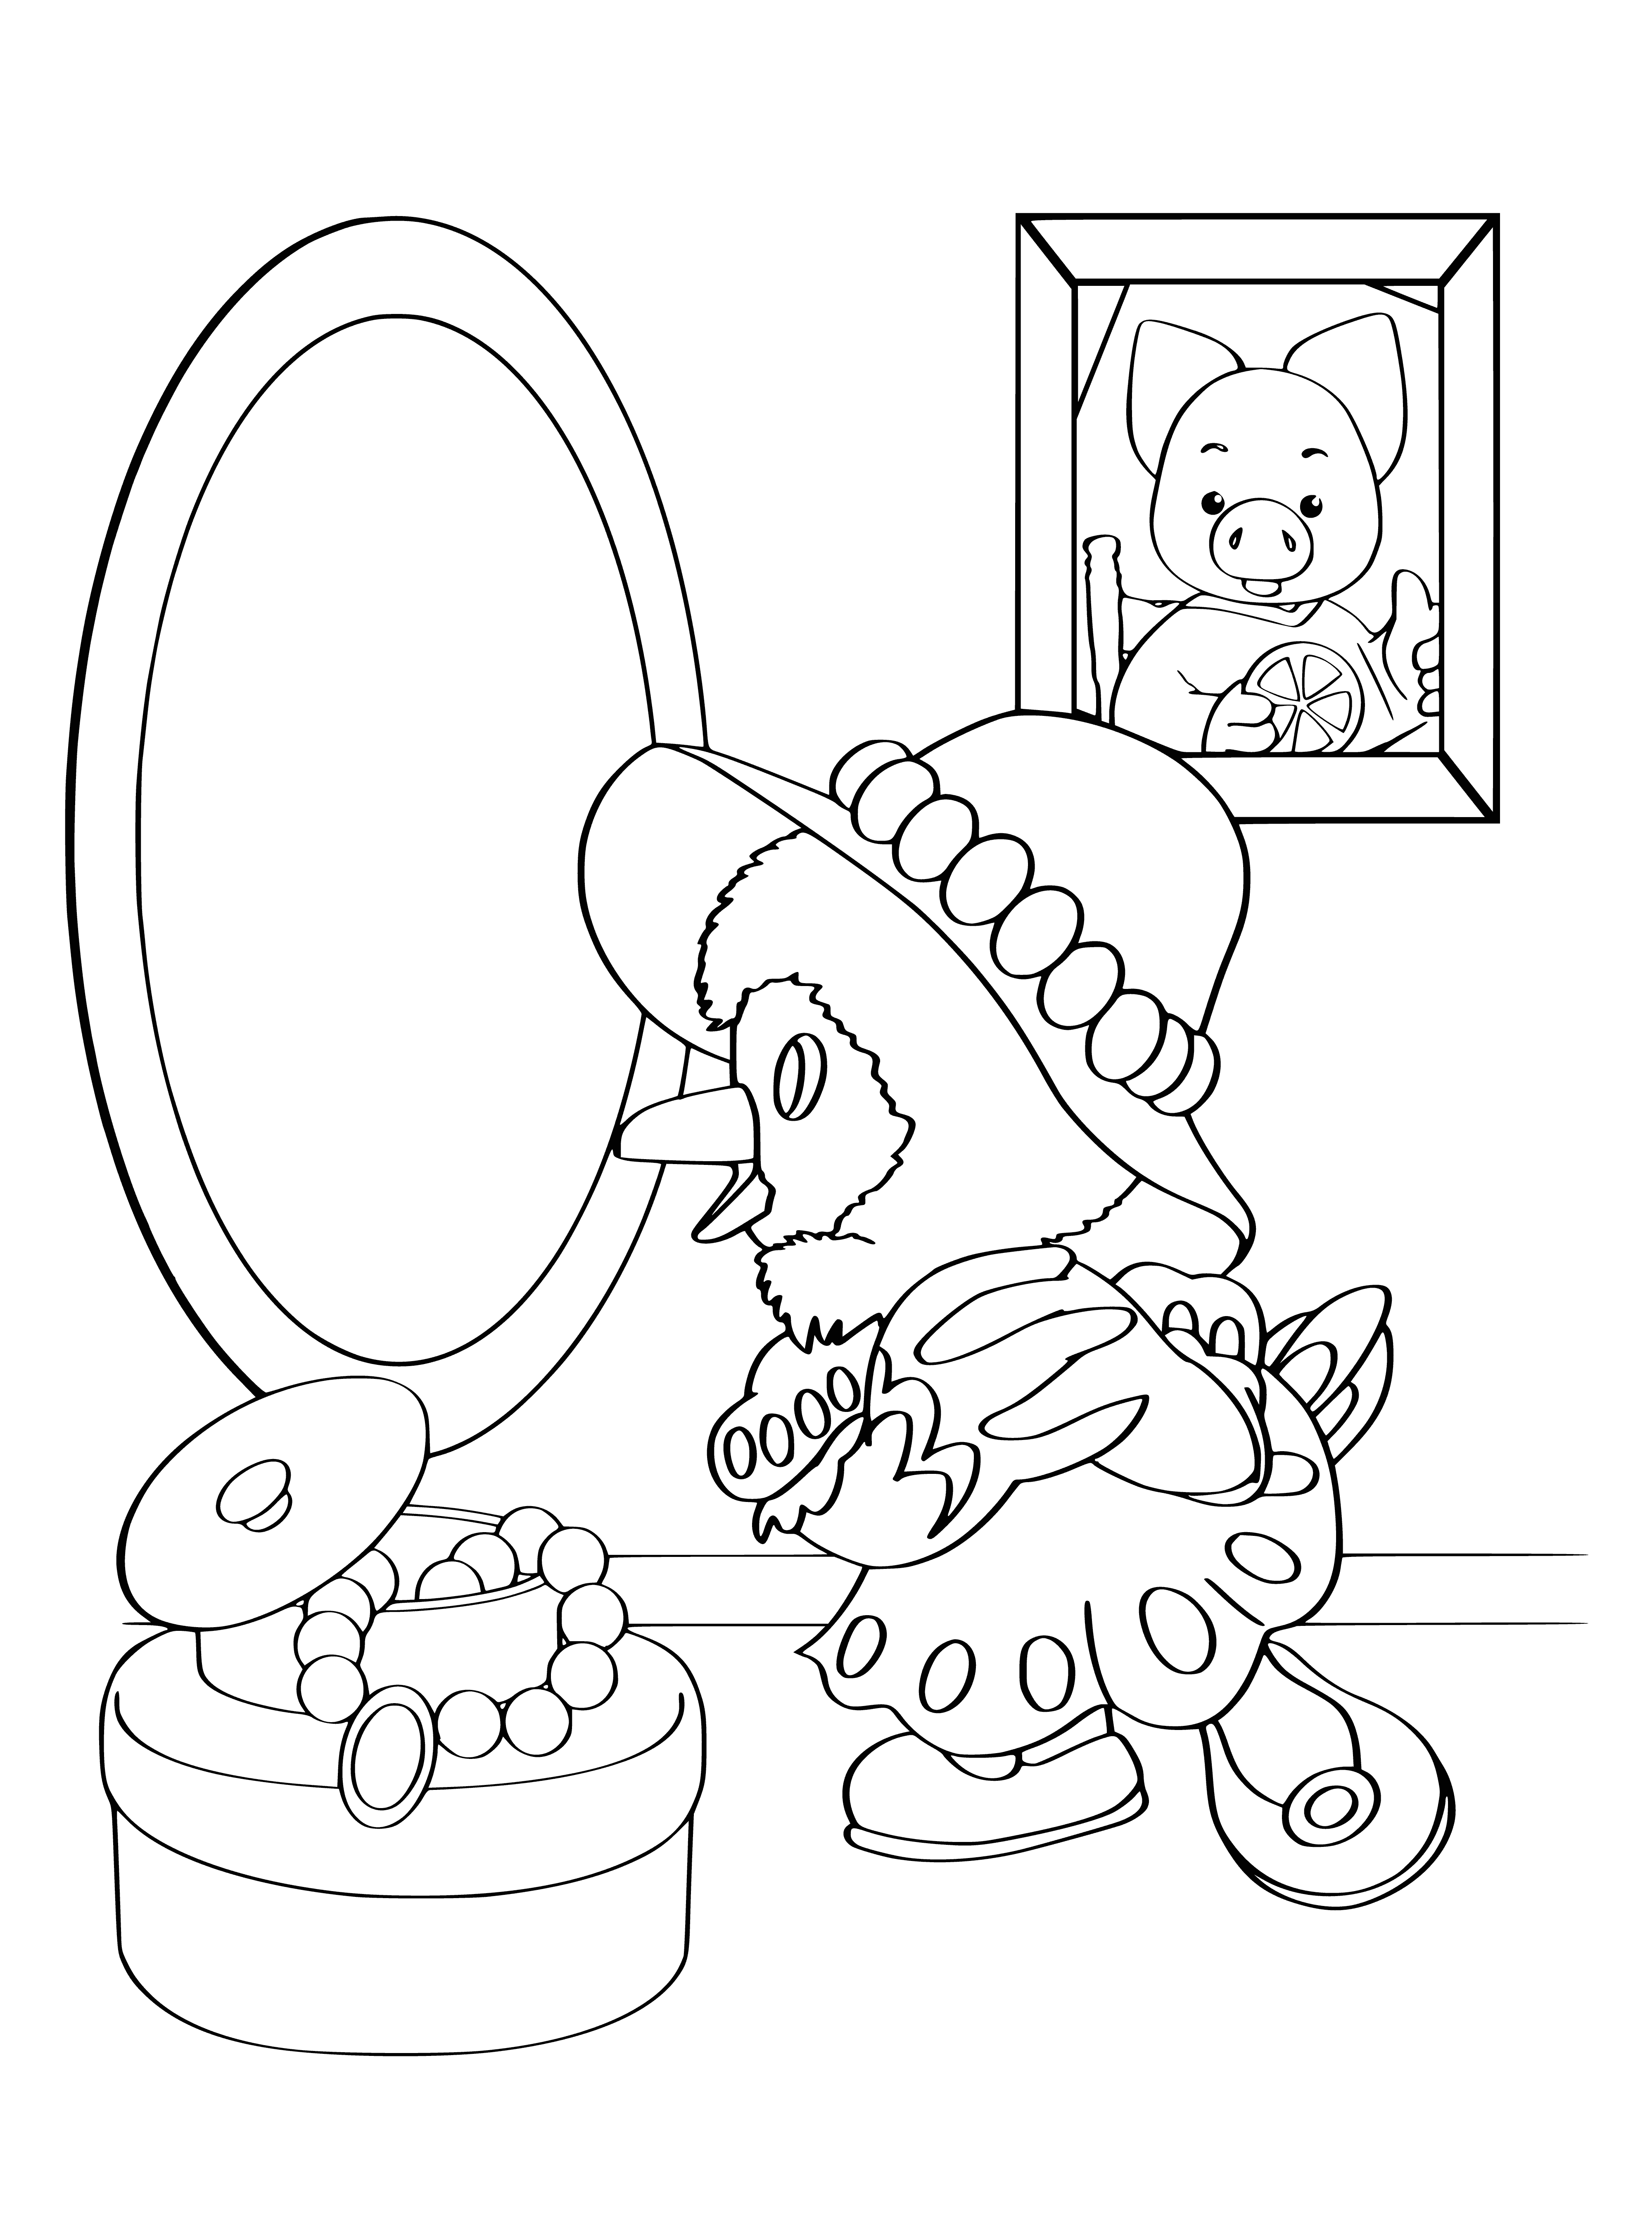 coloring page: Karkusha stands at the beds, hands clasped and eyes peaceful, about to say goodnight to a group of small children.